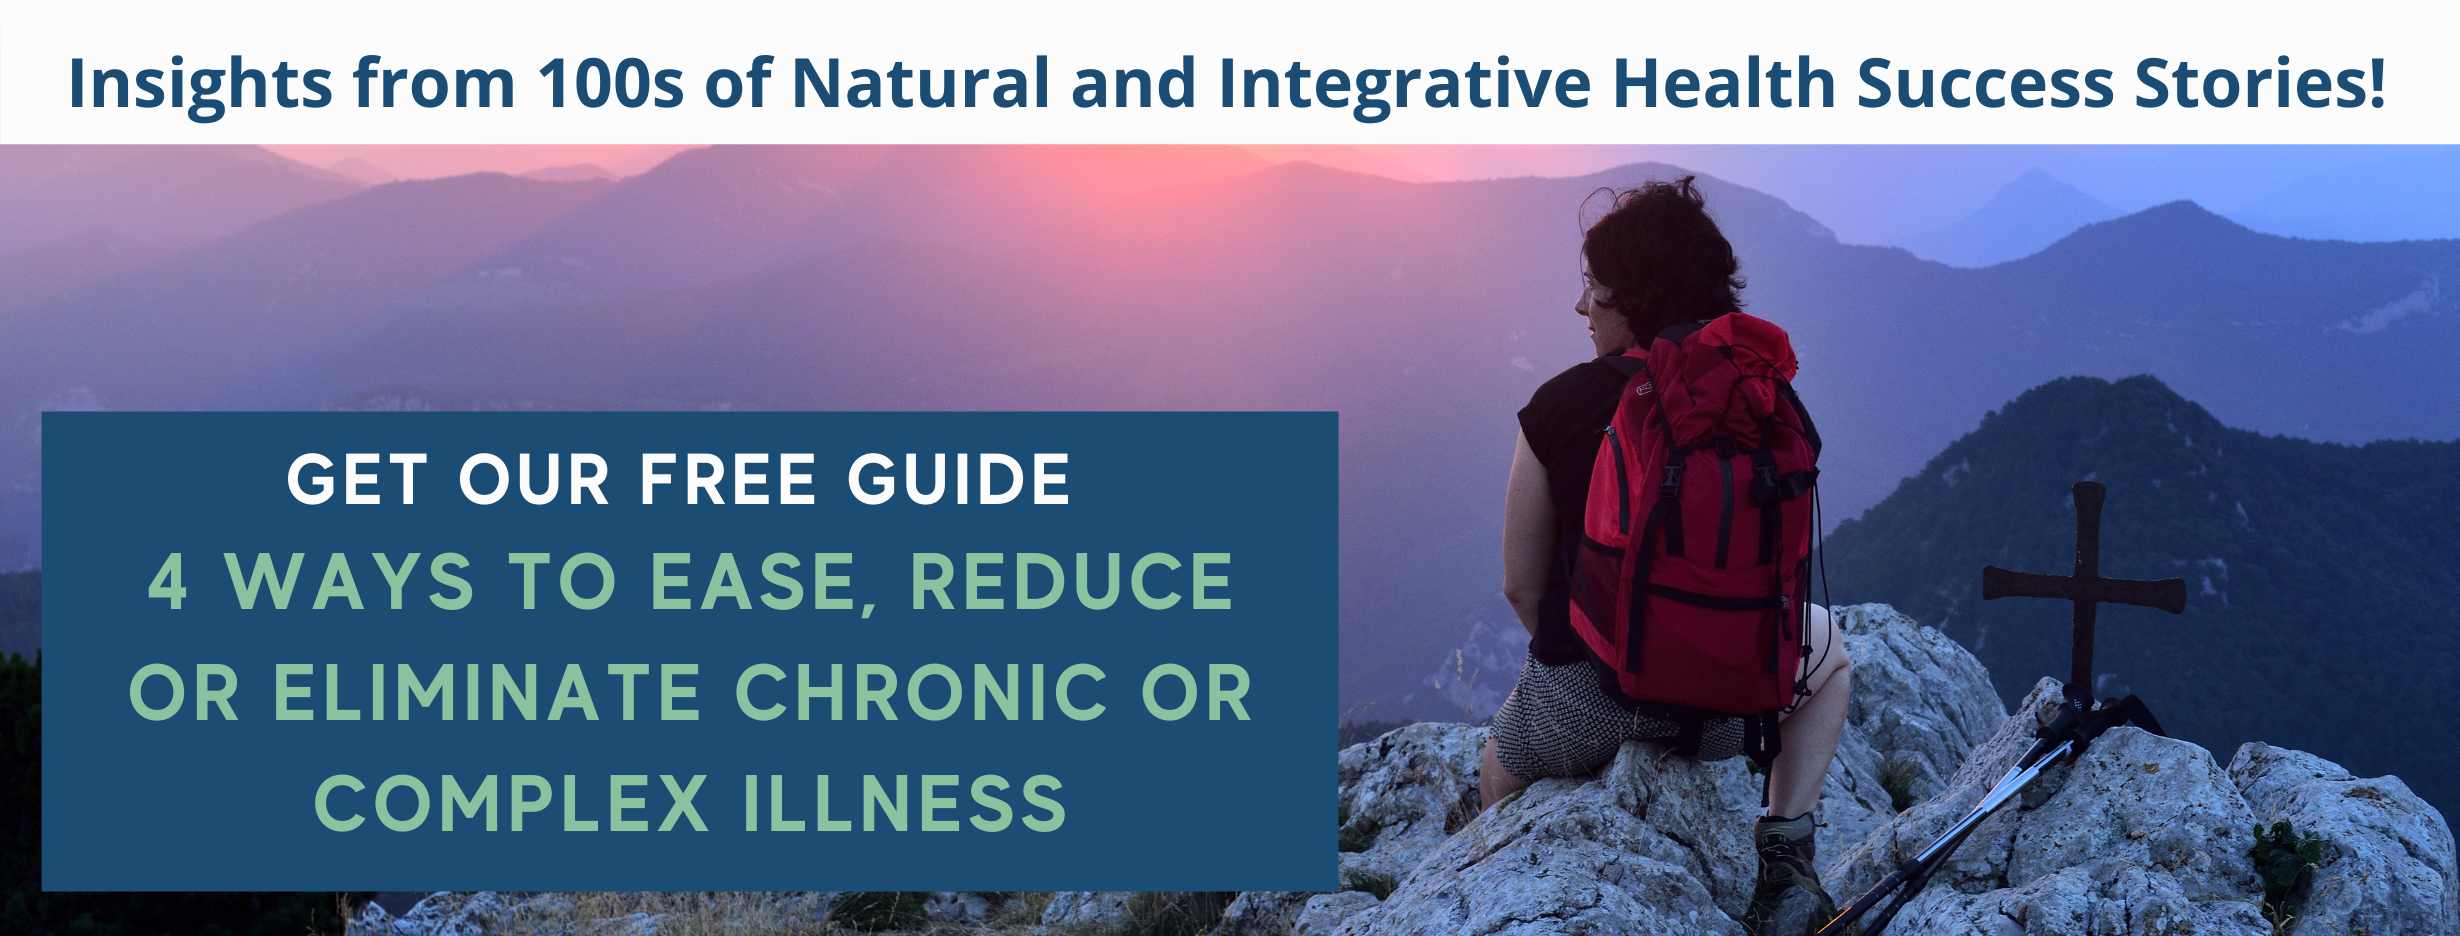 4 ways to ease, reverse or eliminate chronic or complex illness